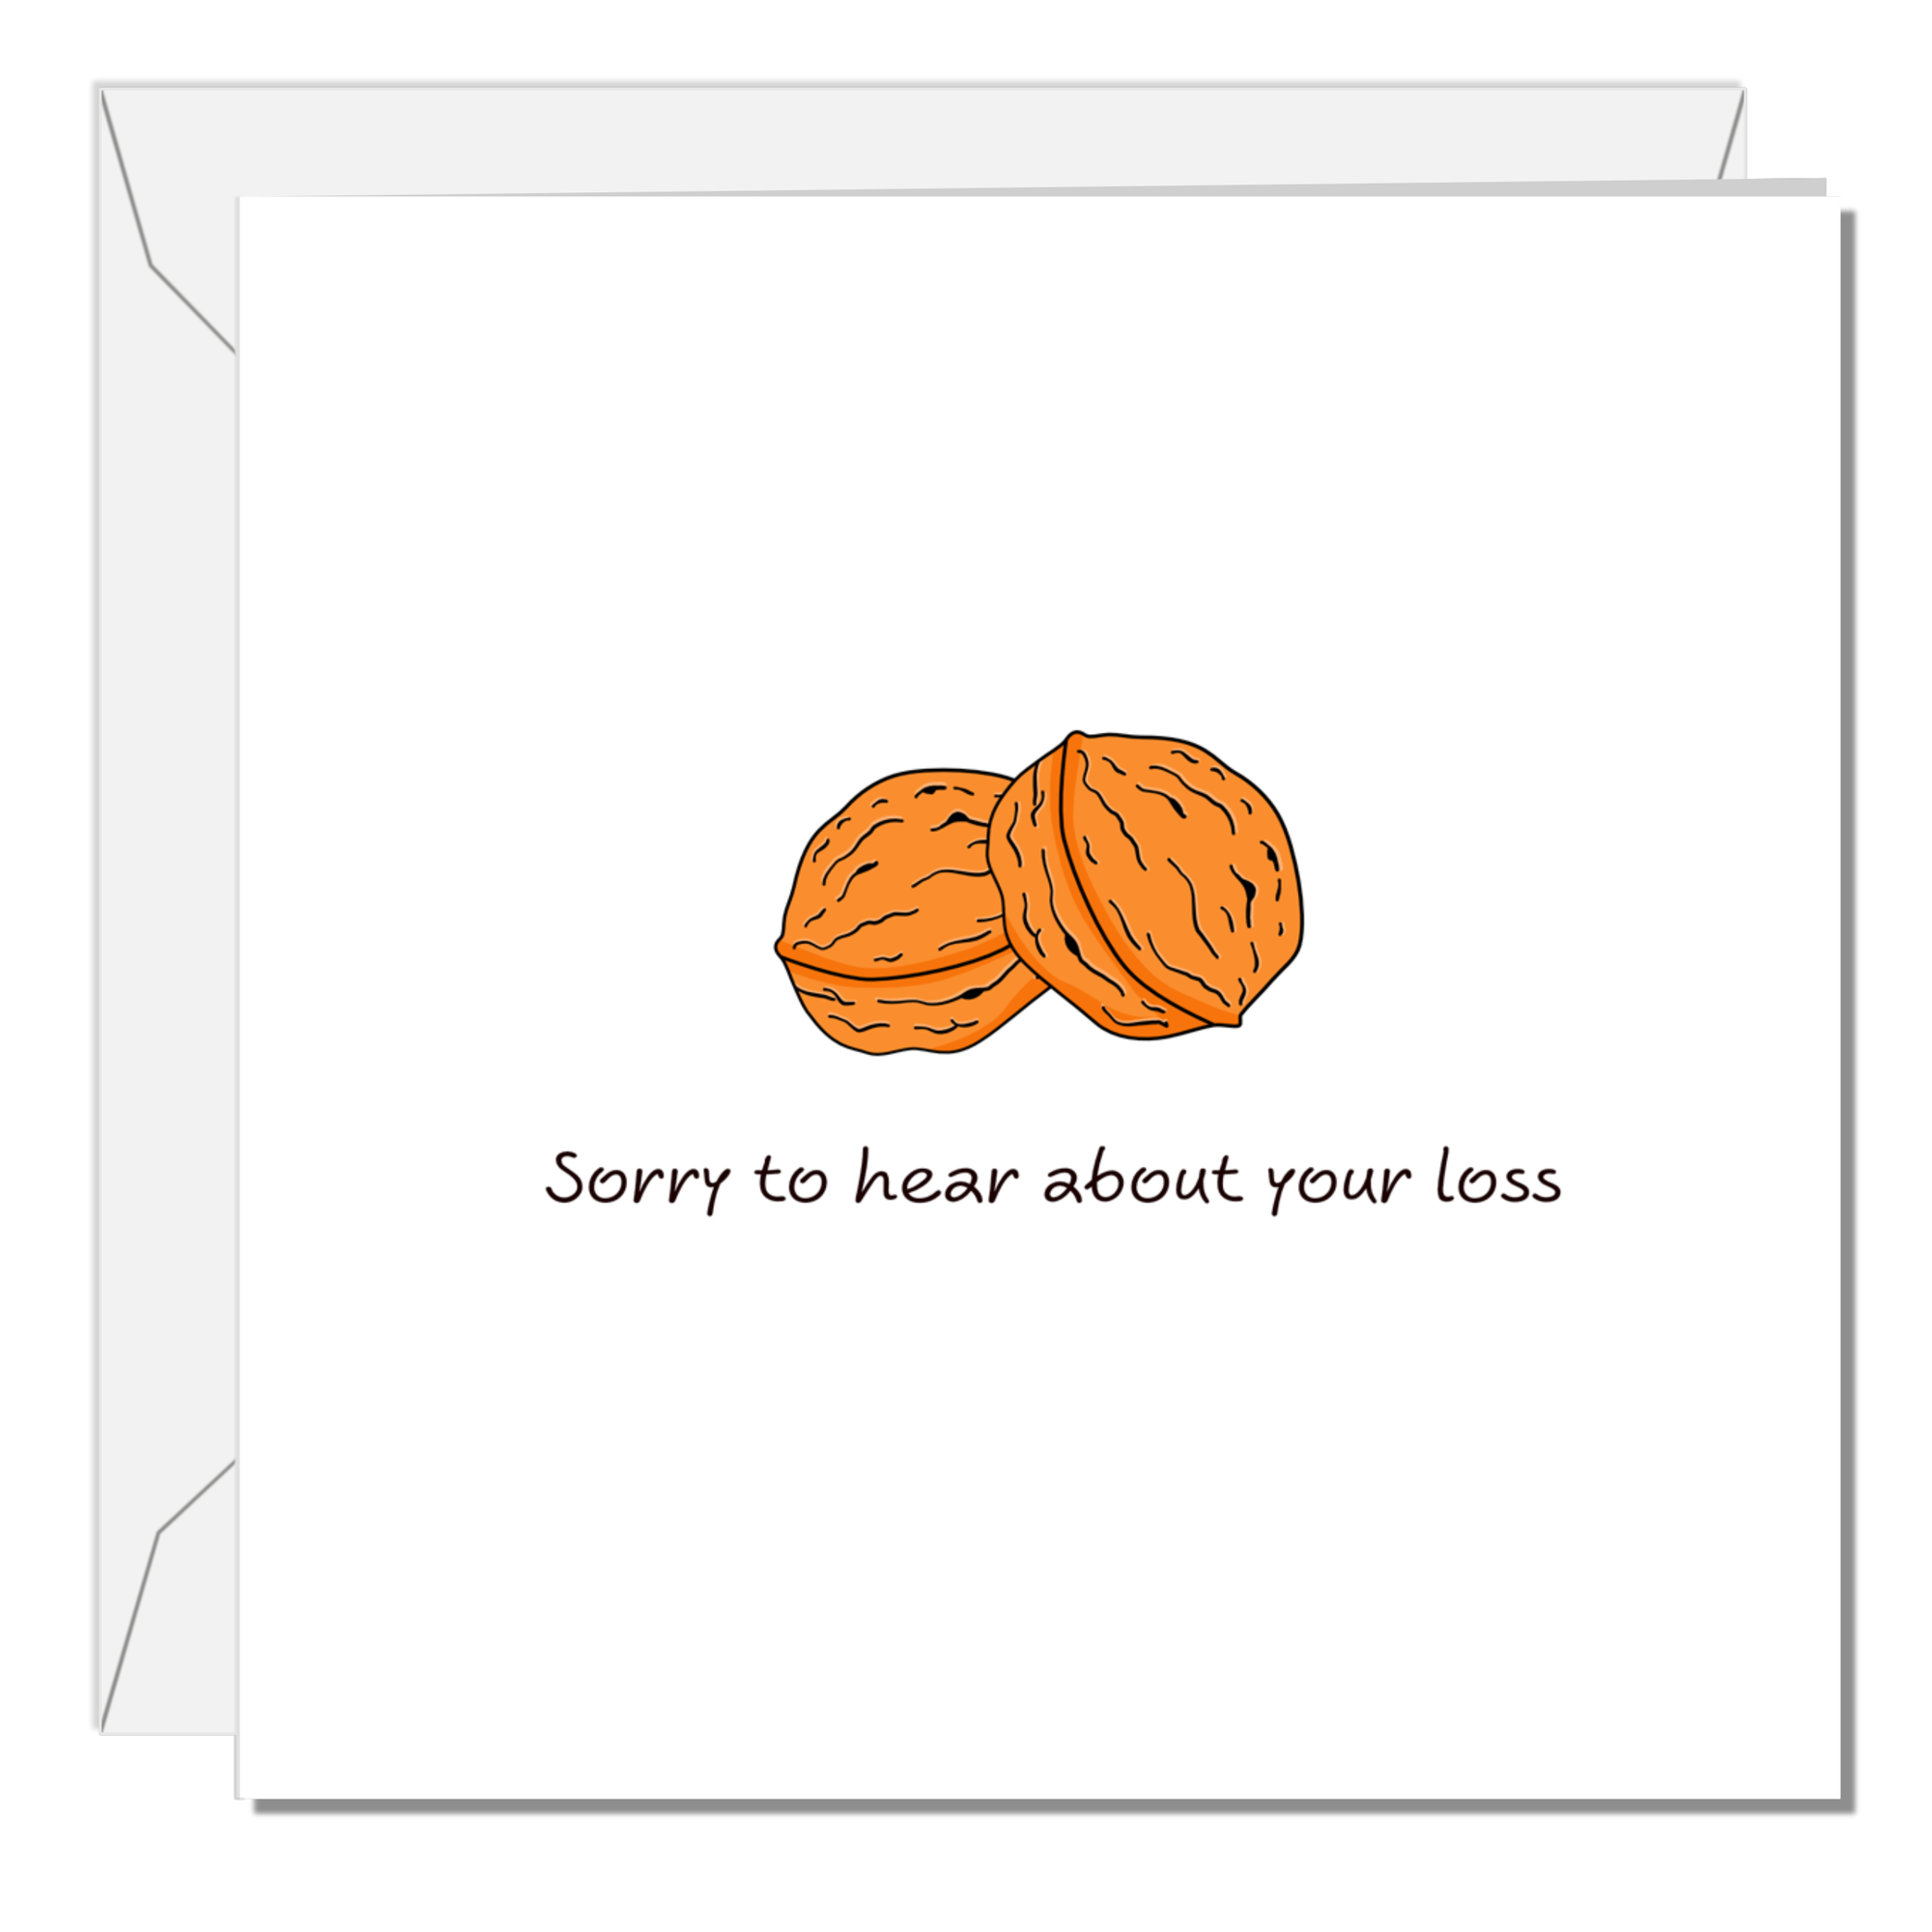 Funny Vasectomy Card for husband, brother, son, uncle, grandfather or any man who has just had a vasectomy operation / surgery.